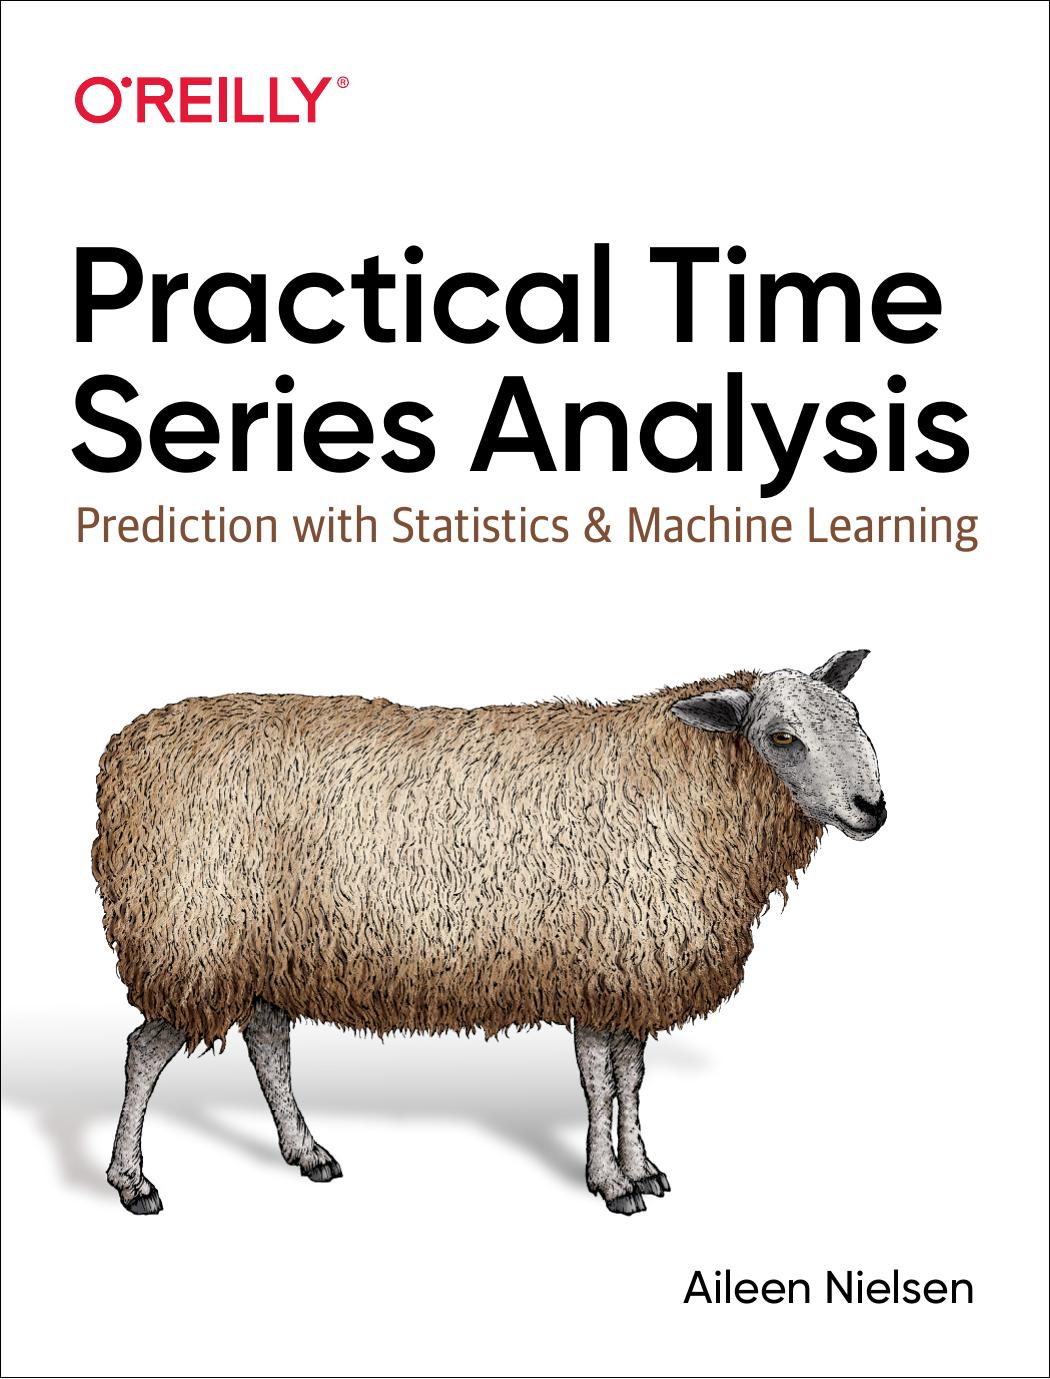 Practical Time Series Analysis by Aileen Nielsen